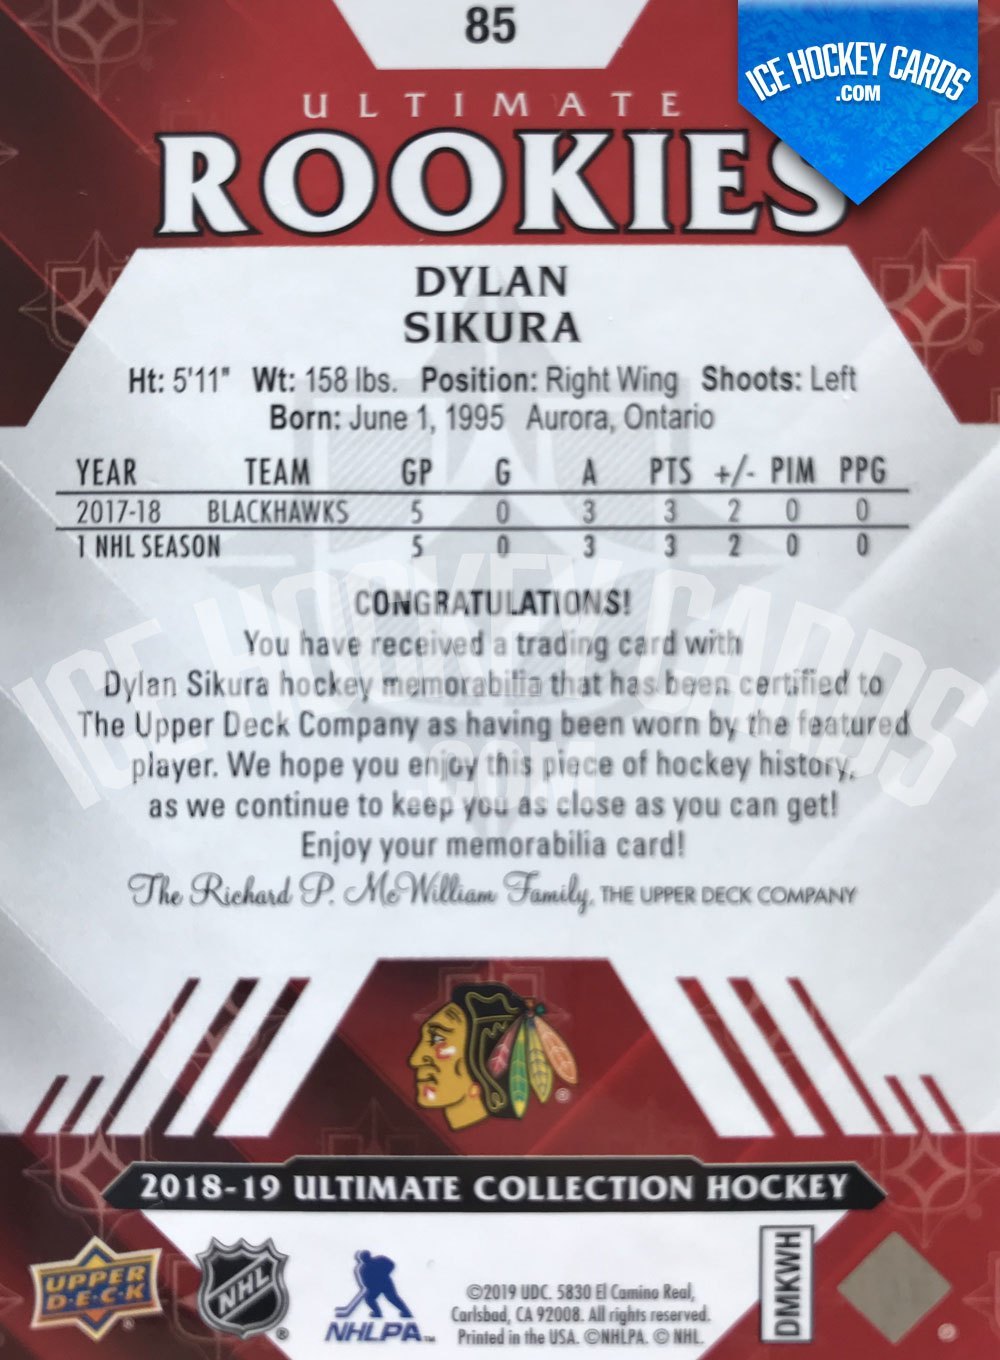 Upper Deck - Ultimate Collection 18-19 - Dylan Sikura Ultimate Rookies Patch Card back